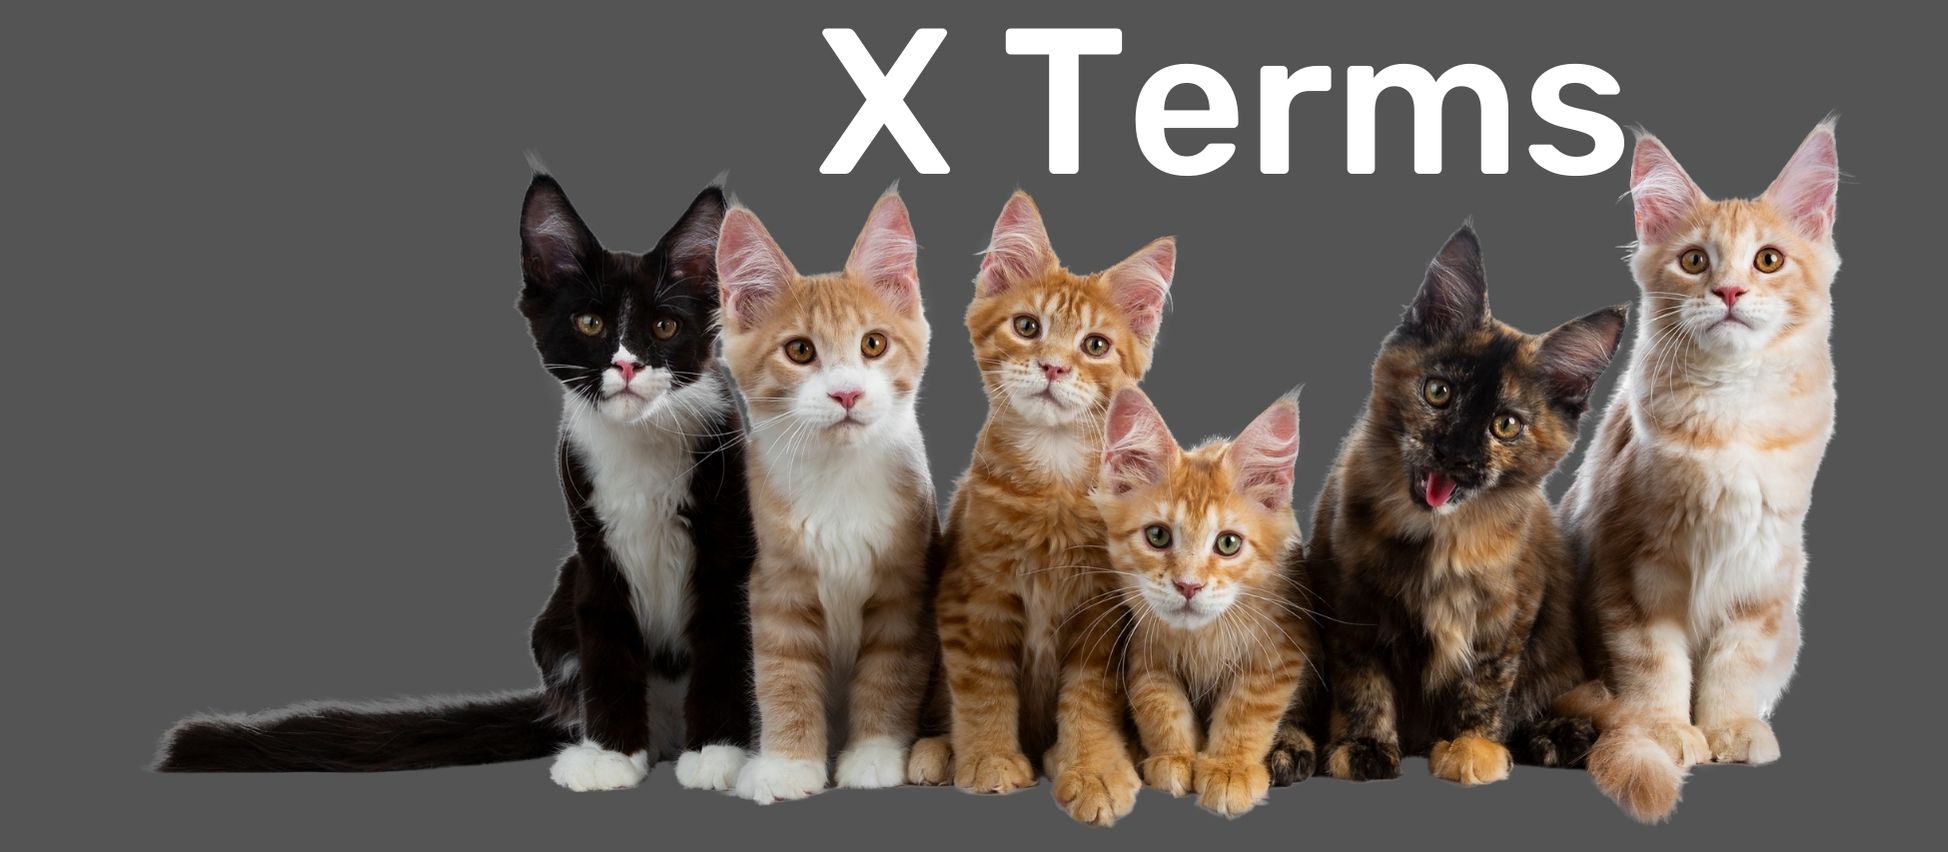 Group of six cats in front of a gray background with text reading 'X Terms' at the top to indicate a new section of the glossary